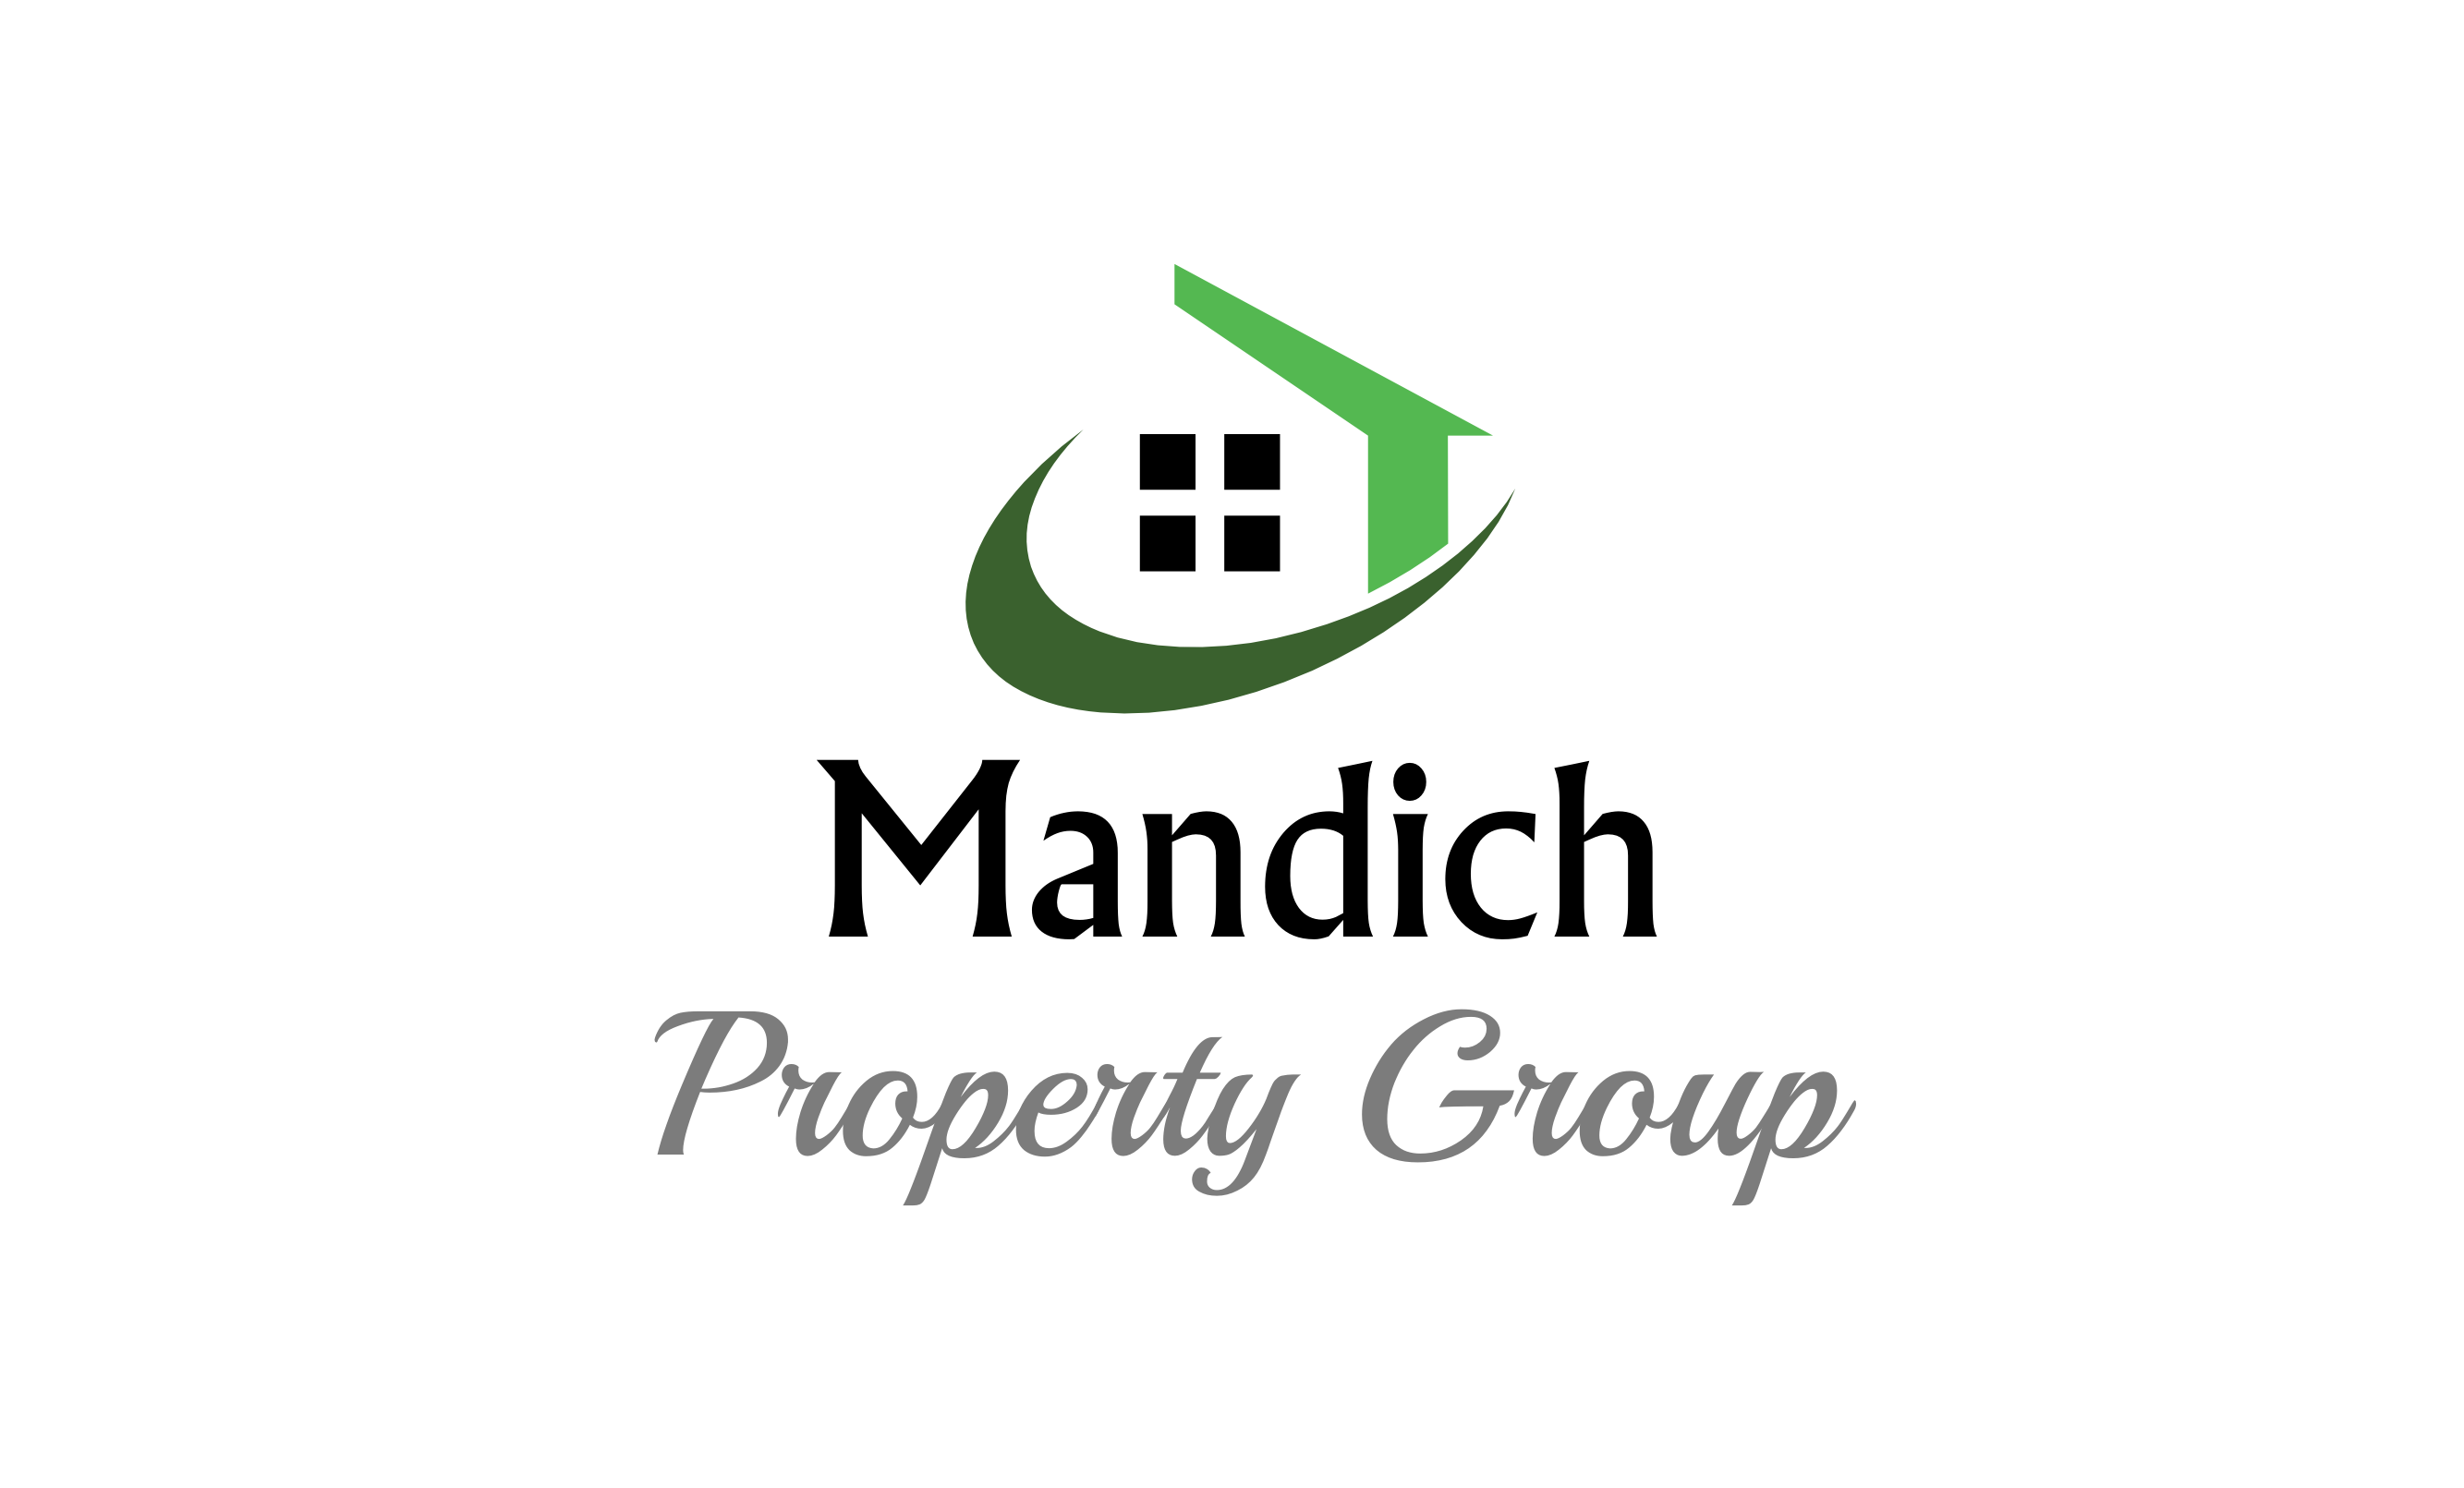 Mandich Property Group - Sell Your House Fast
Mandich Property Group - Company Buys Houses Cash
Mandich Property Group - Sell Your Home No Agent
Mandich Property Group - We Buy Houses